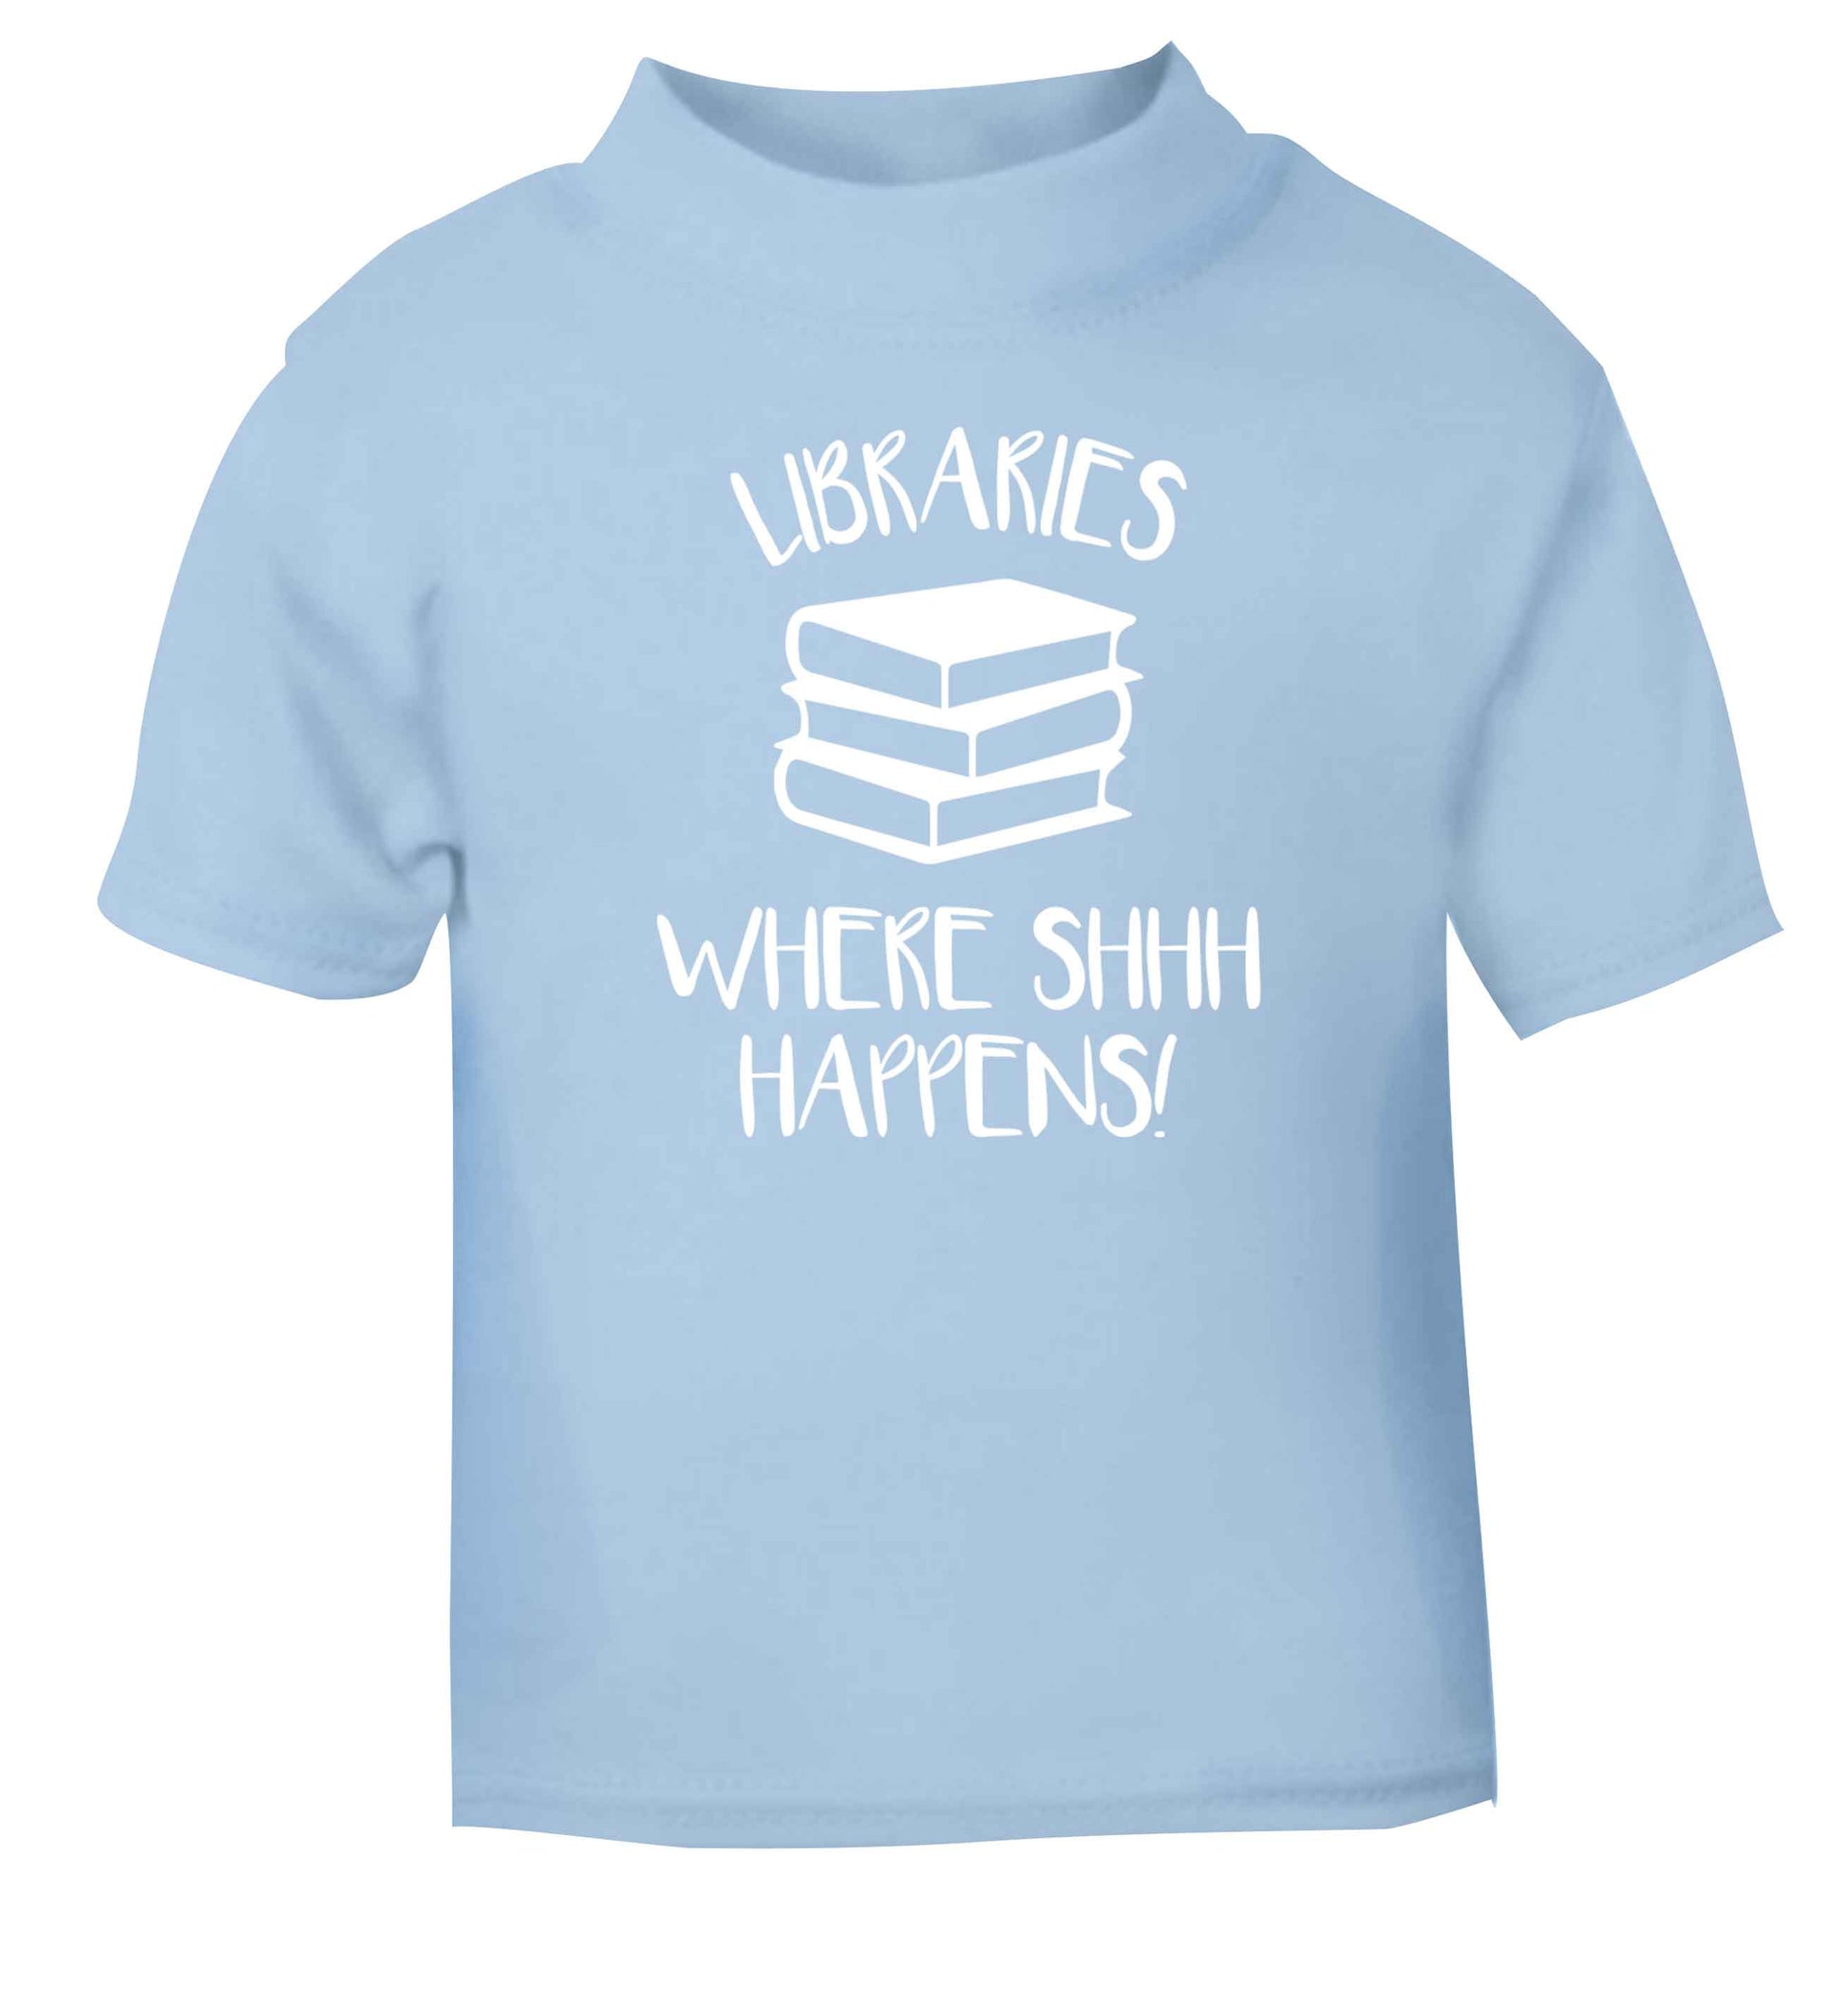 Libraries where shh happens! light blue Baby Toddler Tshirt 2 Years